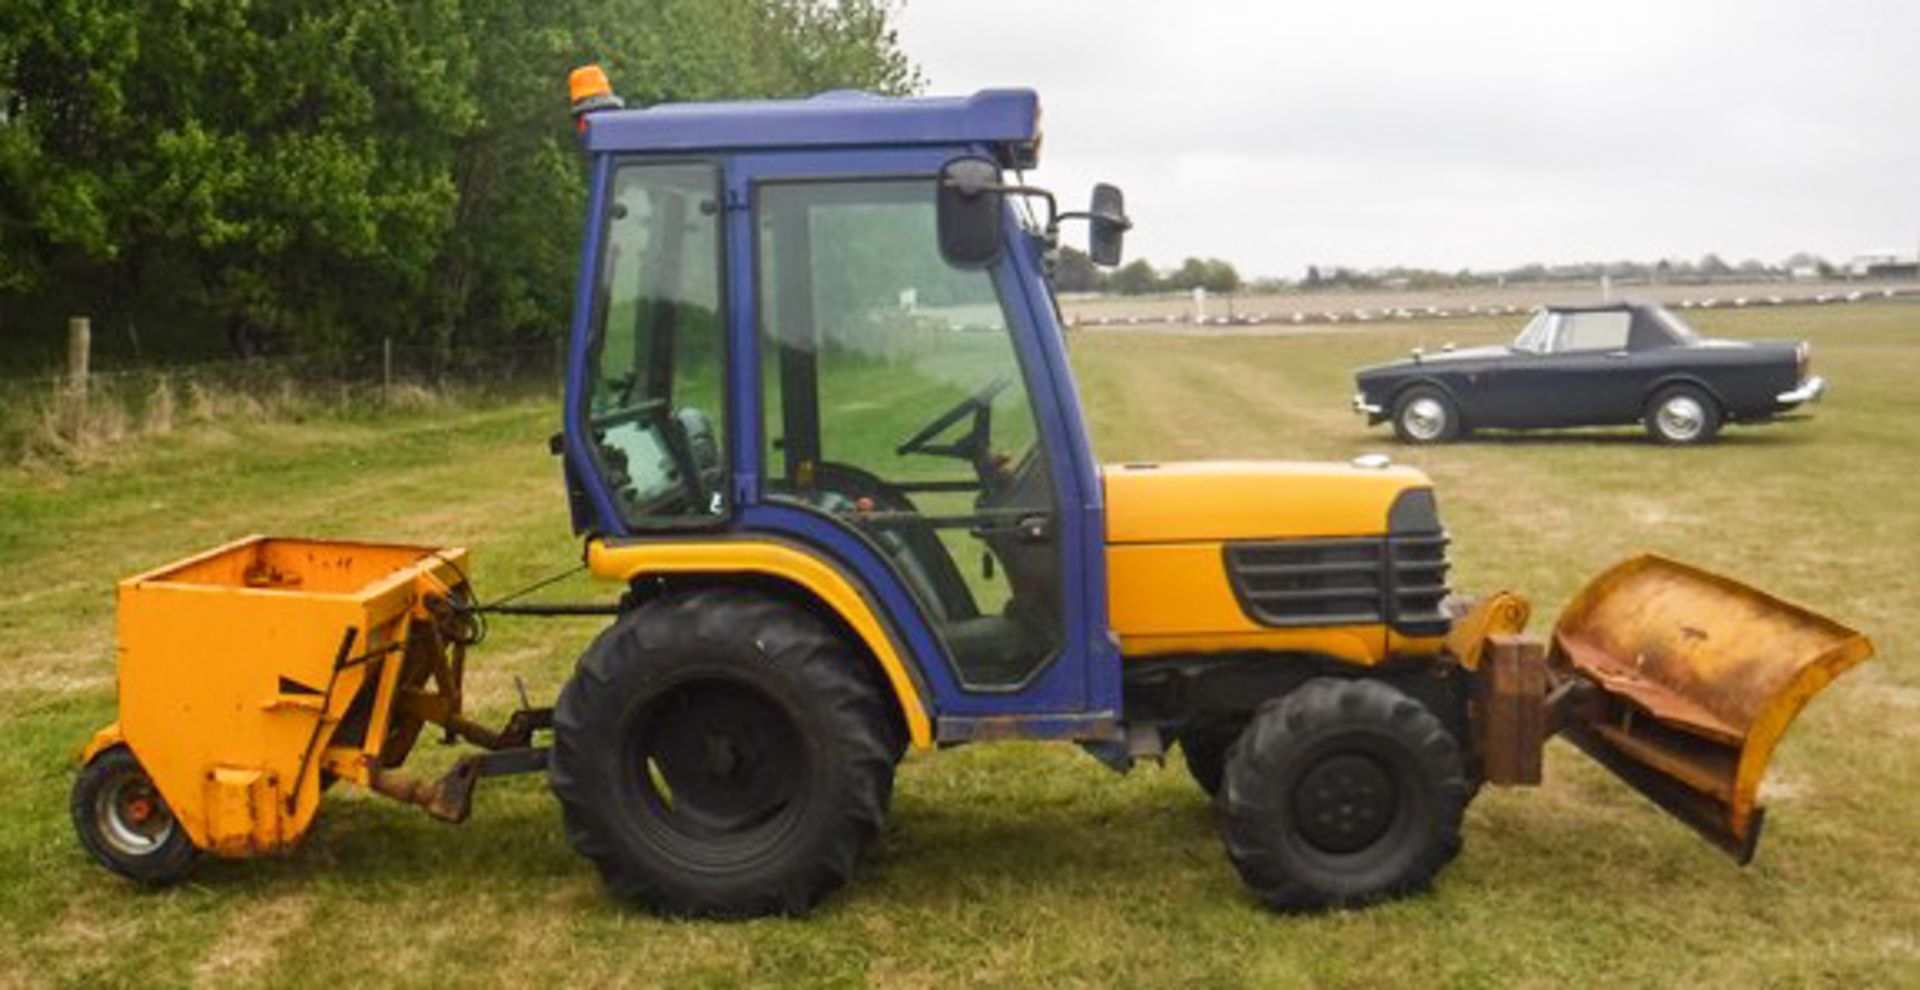 2006 KUBOTA B2400, S/N D31801, REG - SP56DHG, 715HRS (NOT VERIFIED), COMPACT TRACTOR WITH SNOW PLOUG - Image 4 of 17